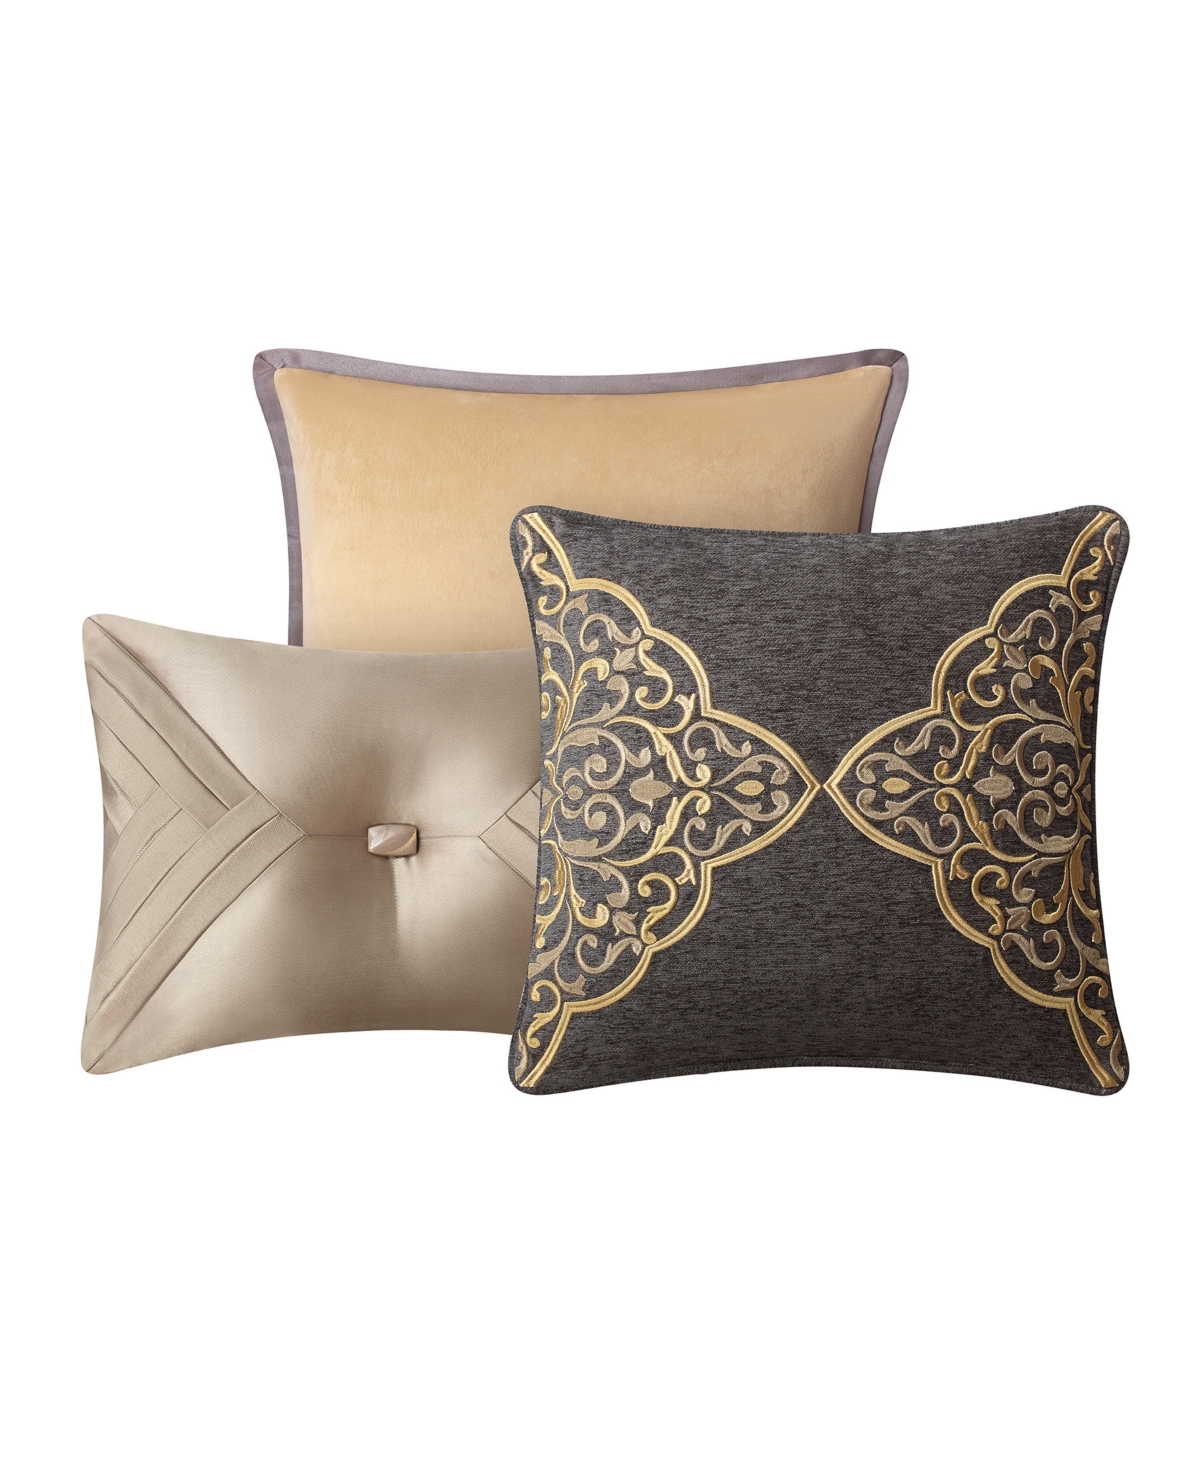 Waterford Everett 3 Piece Decorative Pillows Set In Charcoal